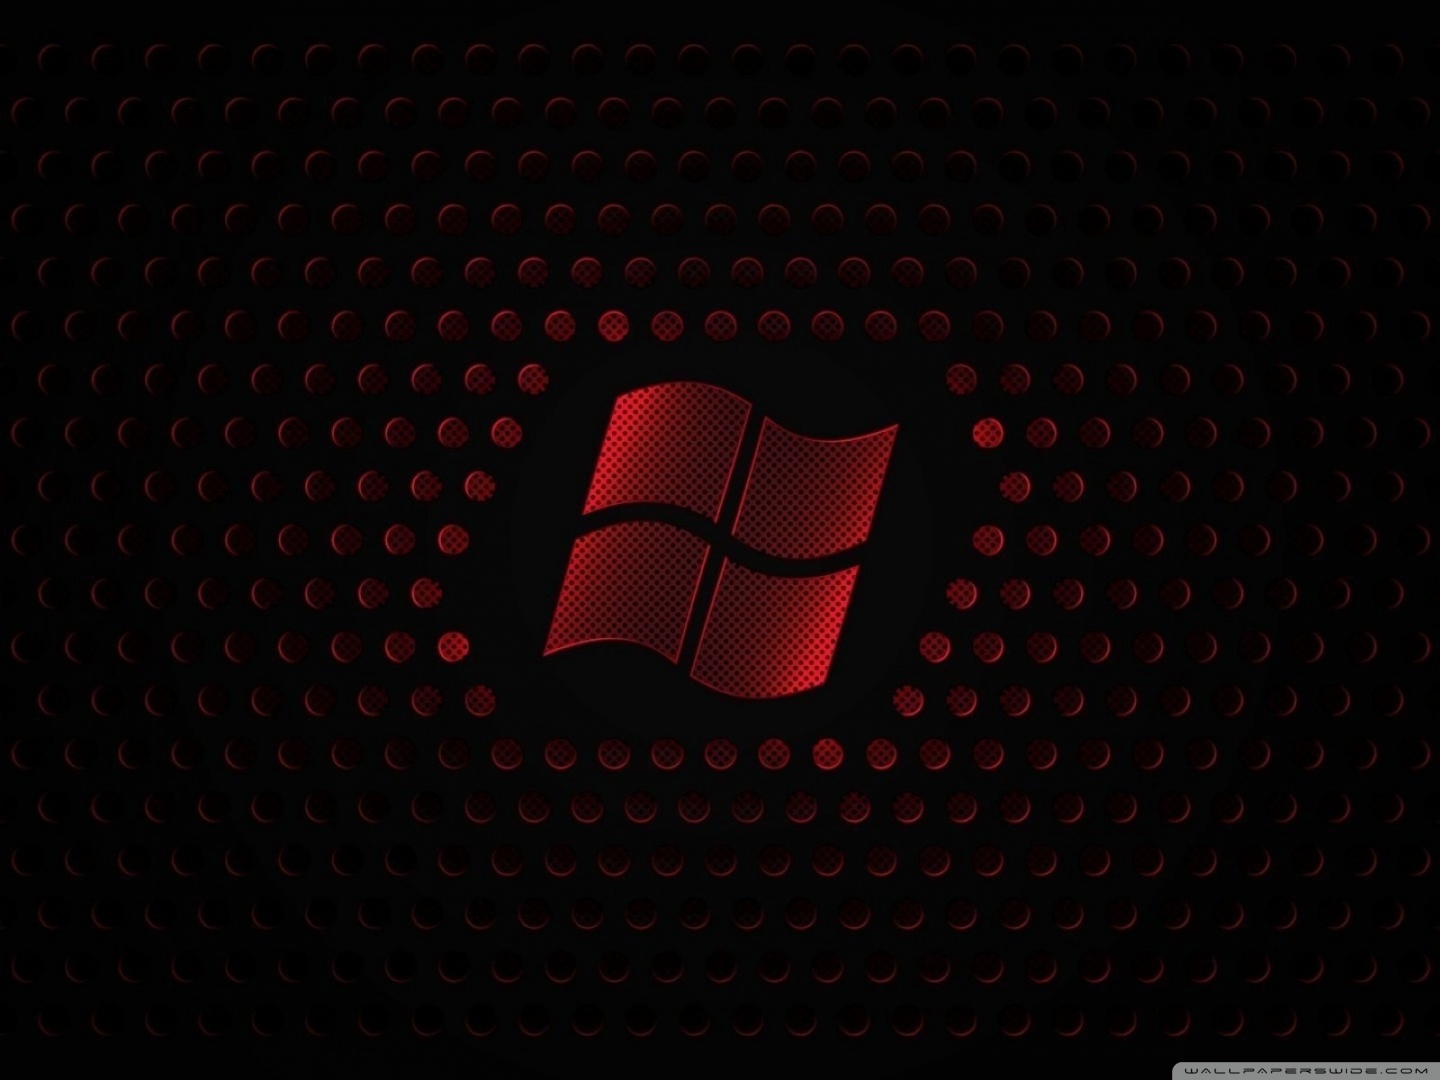 windows 7 microsoft windows operating systems minimalism simple background  logo wallpaper - Coolwallpapers.me!